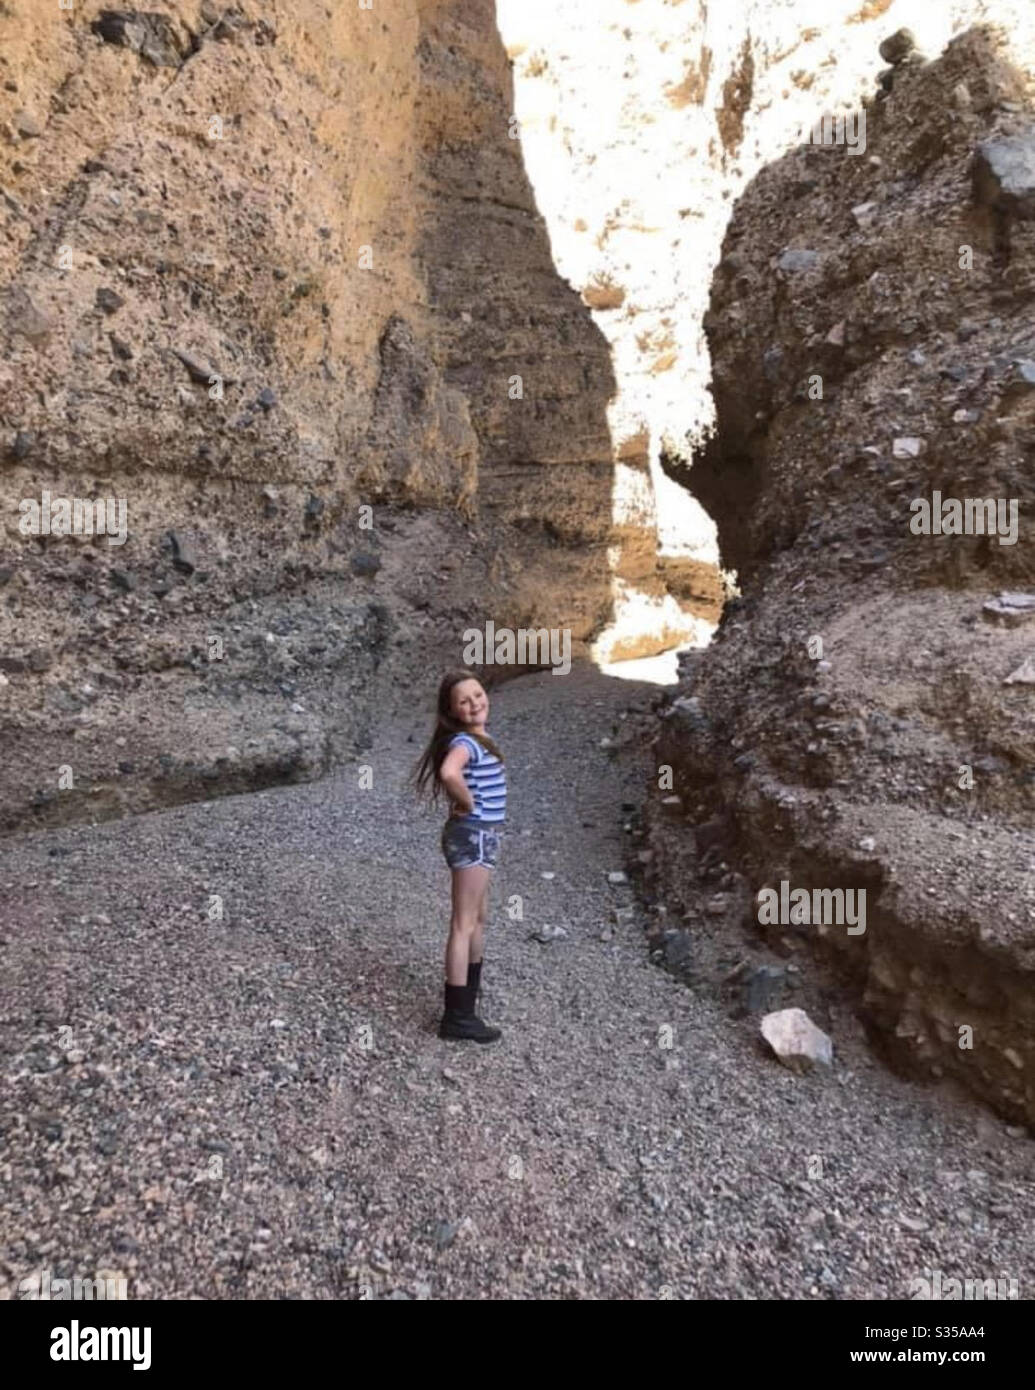 My daughter Cienna posing in front of the slot entrance in Afton Canyon California Stock Photo